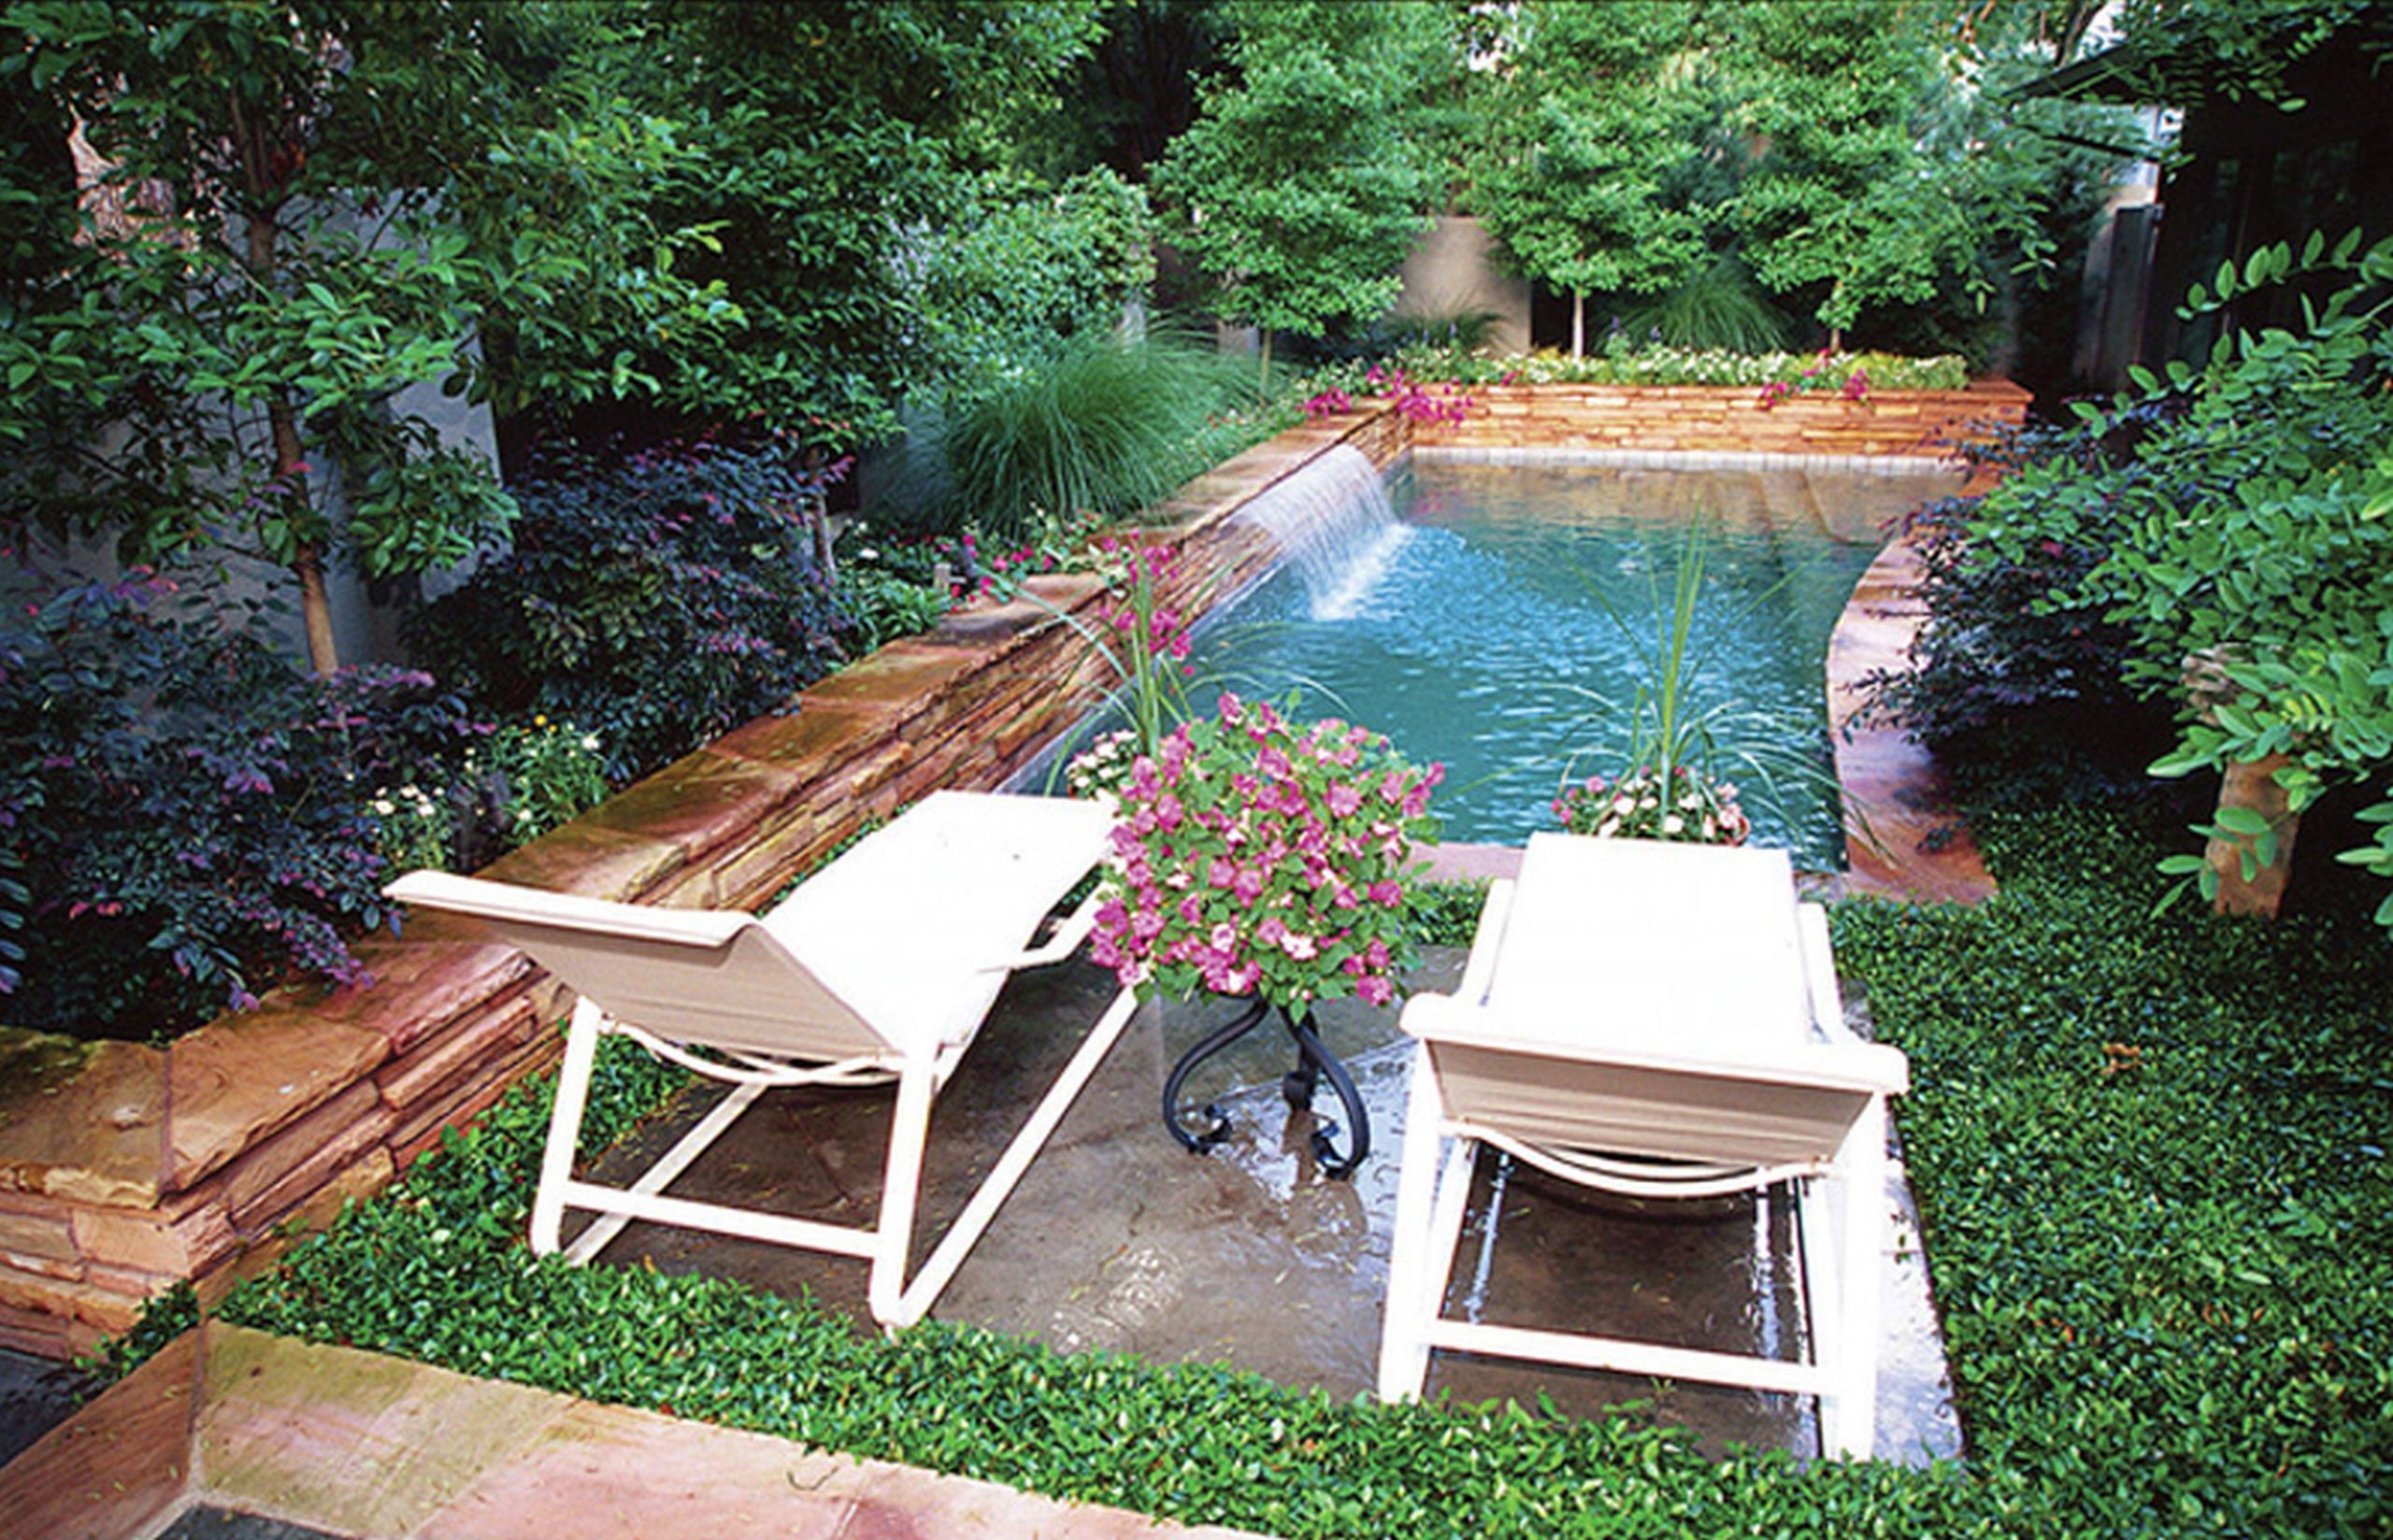 Terrace Landscape On A Budget
 30 Unique Backyard Landscaping A Bud Outdoor areas